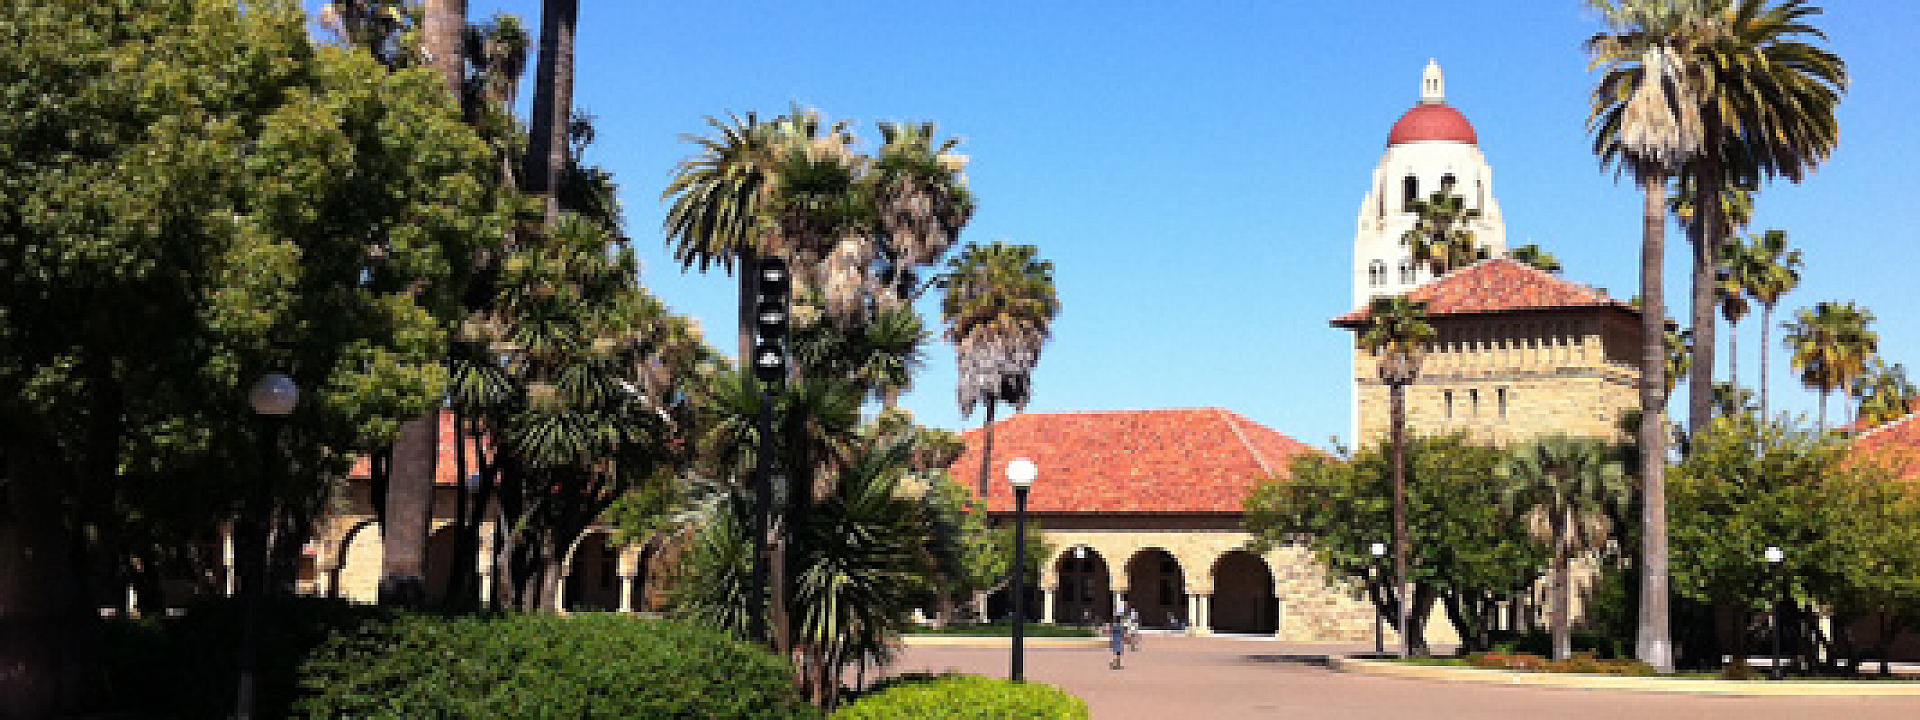 Telfer Executive MBA Class in Silicon Valley: Student Blog